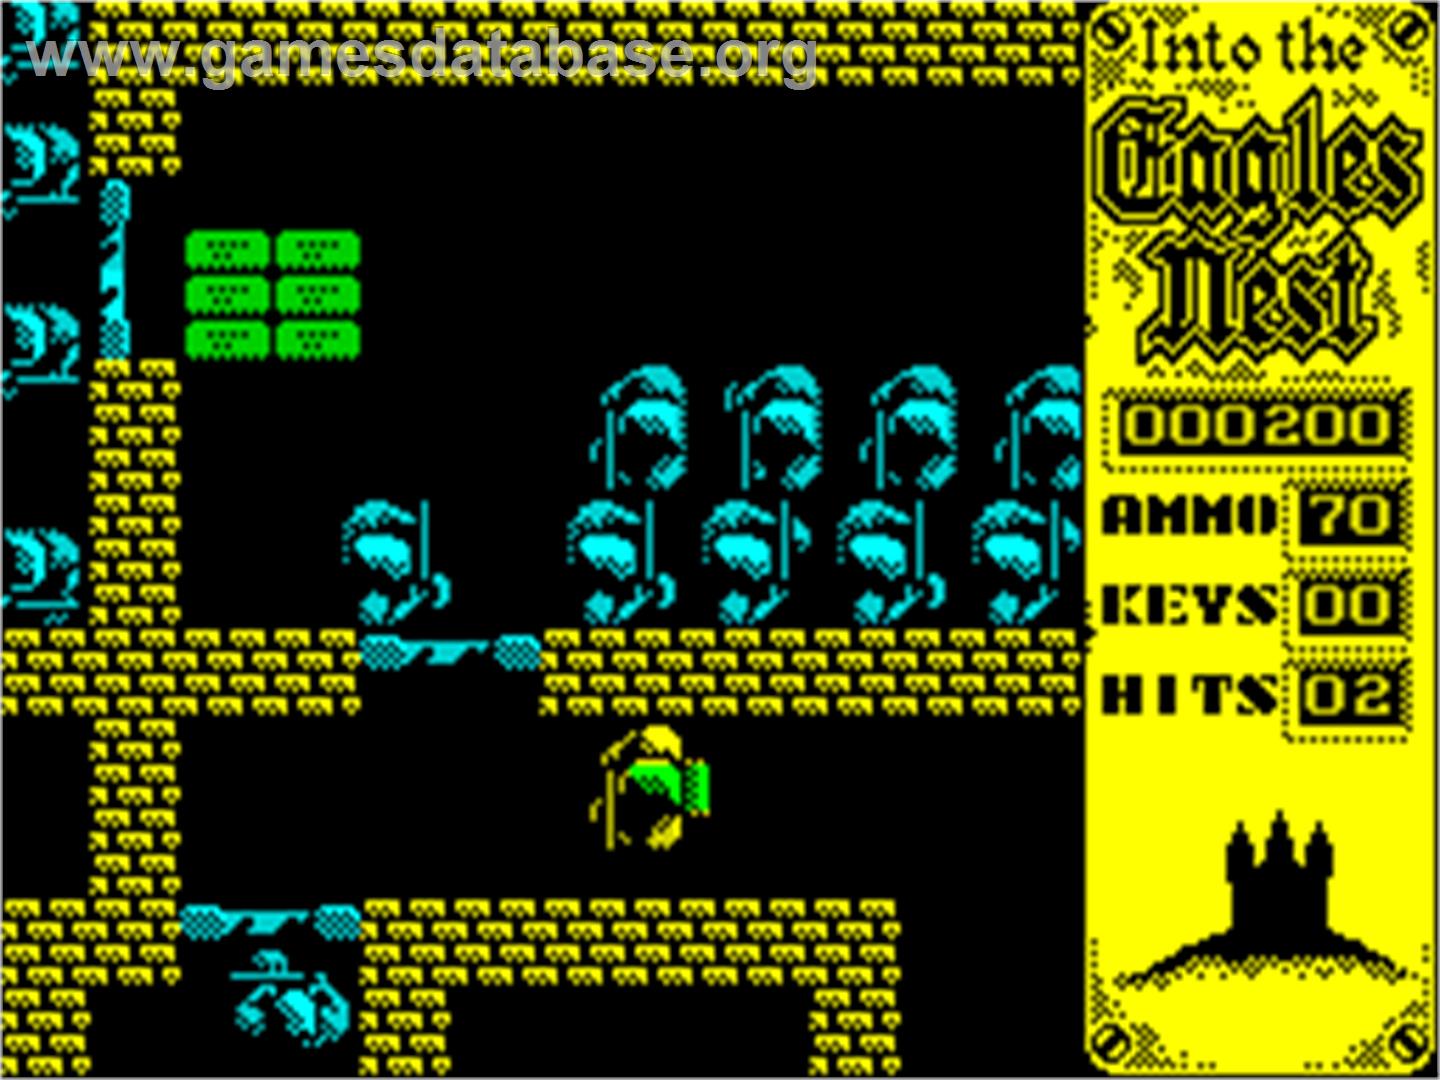 Into the Eagle's Nest - Sinclair ZX Spectrum - Artwork - In Game